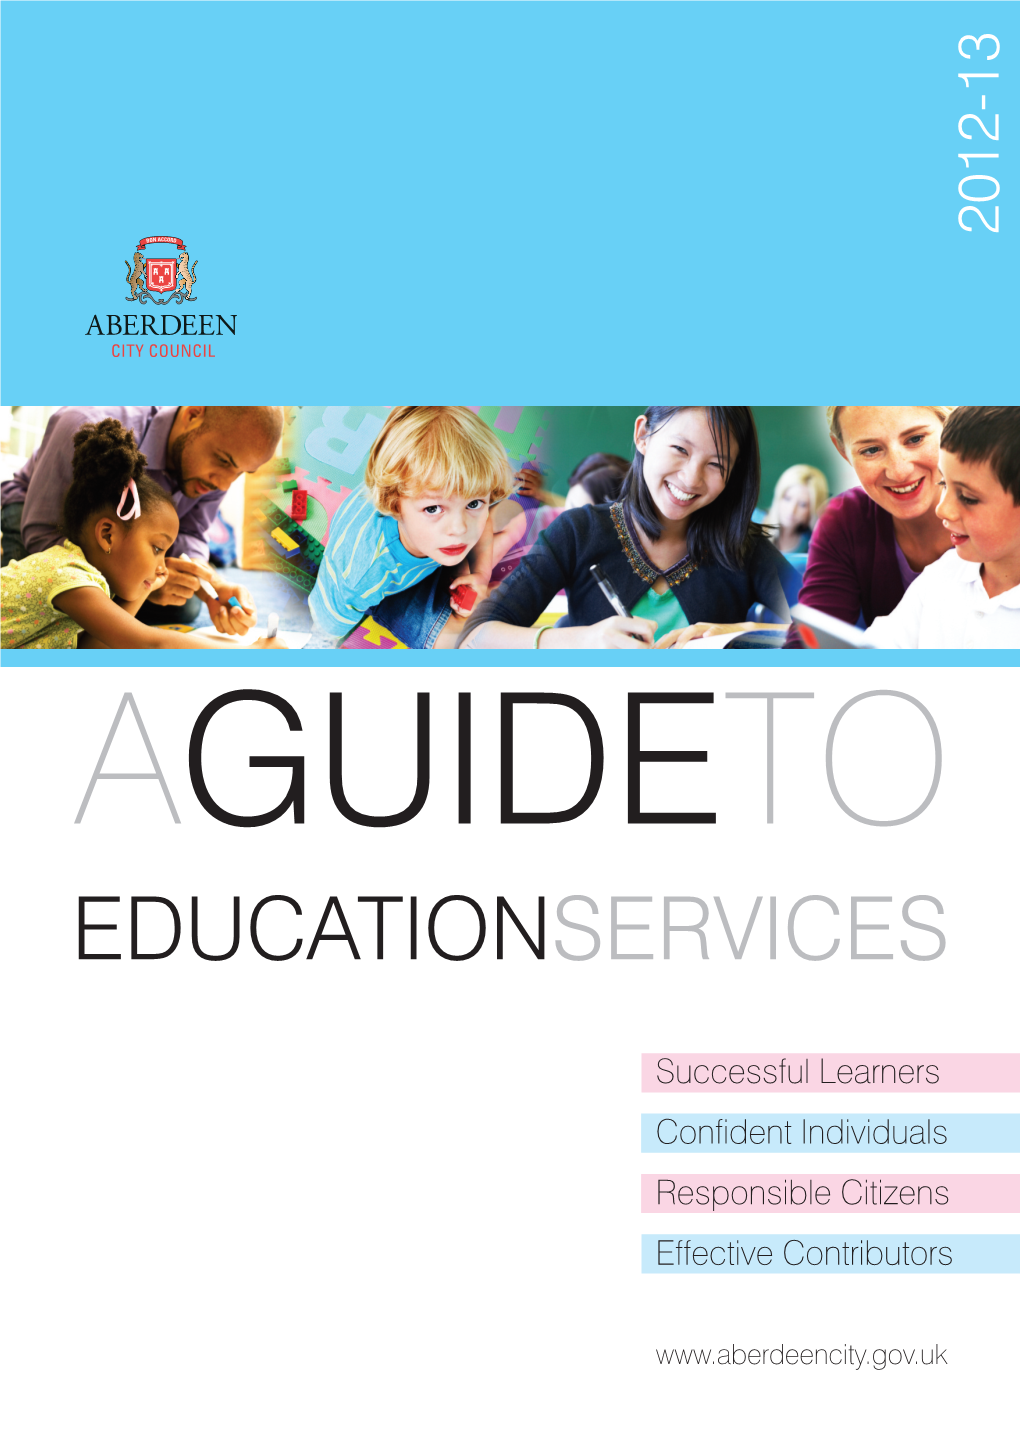 Aberdeencity.Gov.Uk AGUIDE to EDUCATION SERVICES